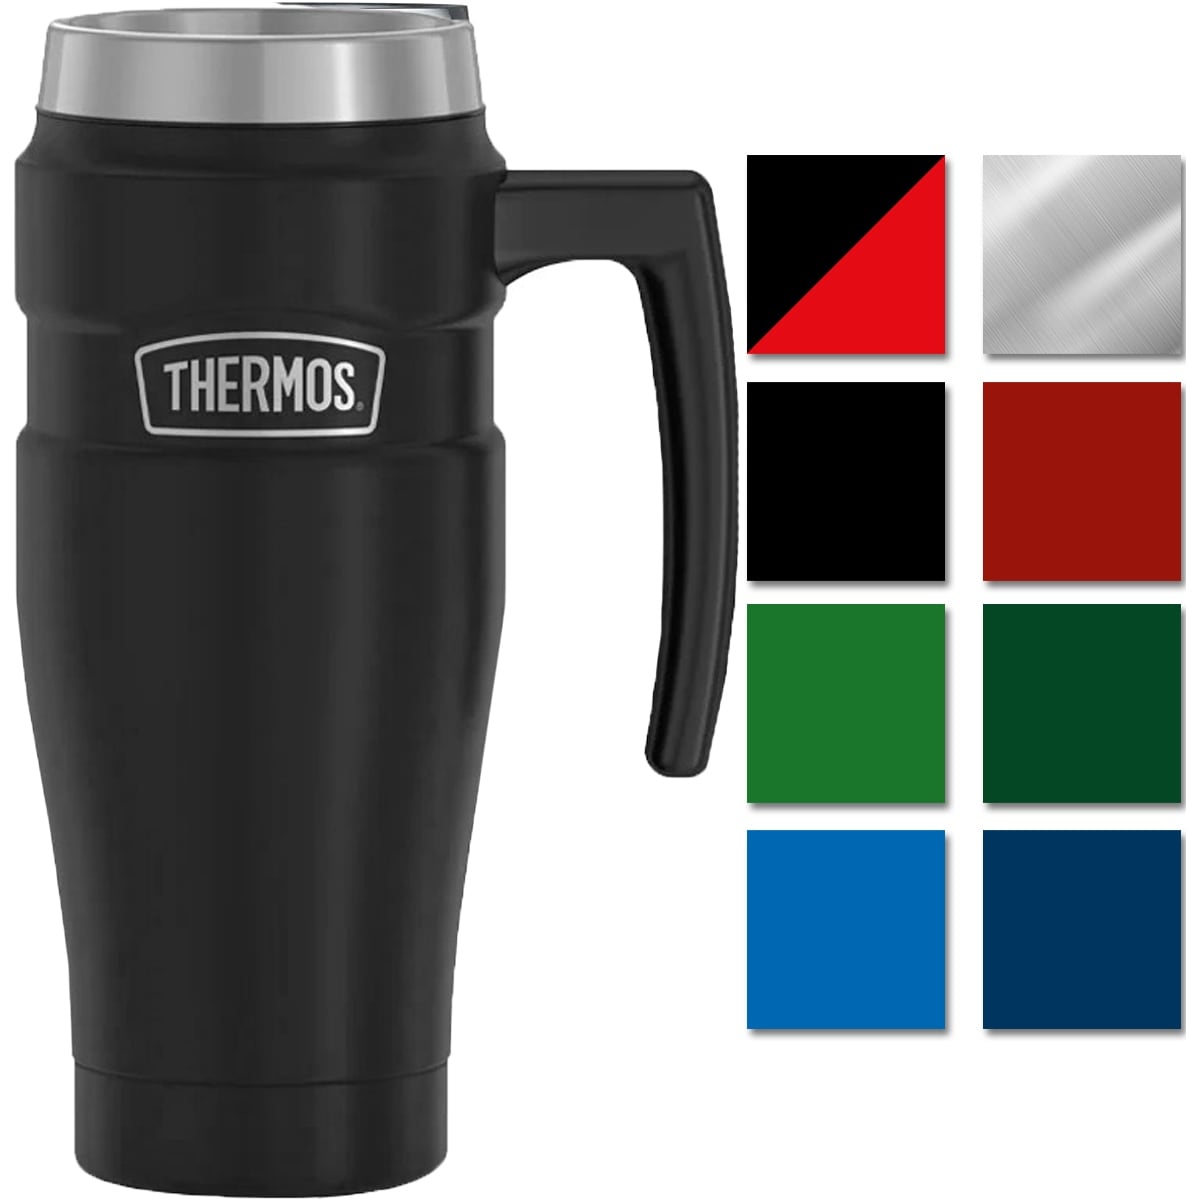 NEW Thermos Plastic Outer Travel Mug 470 ml S/Steel Insulated Interior Coloured 